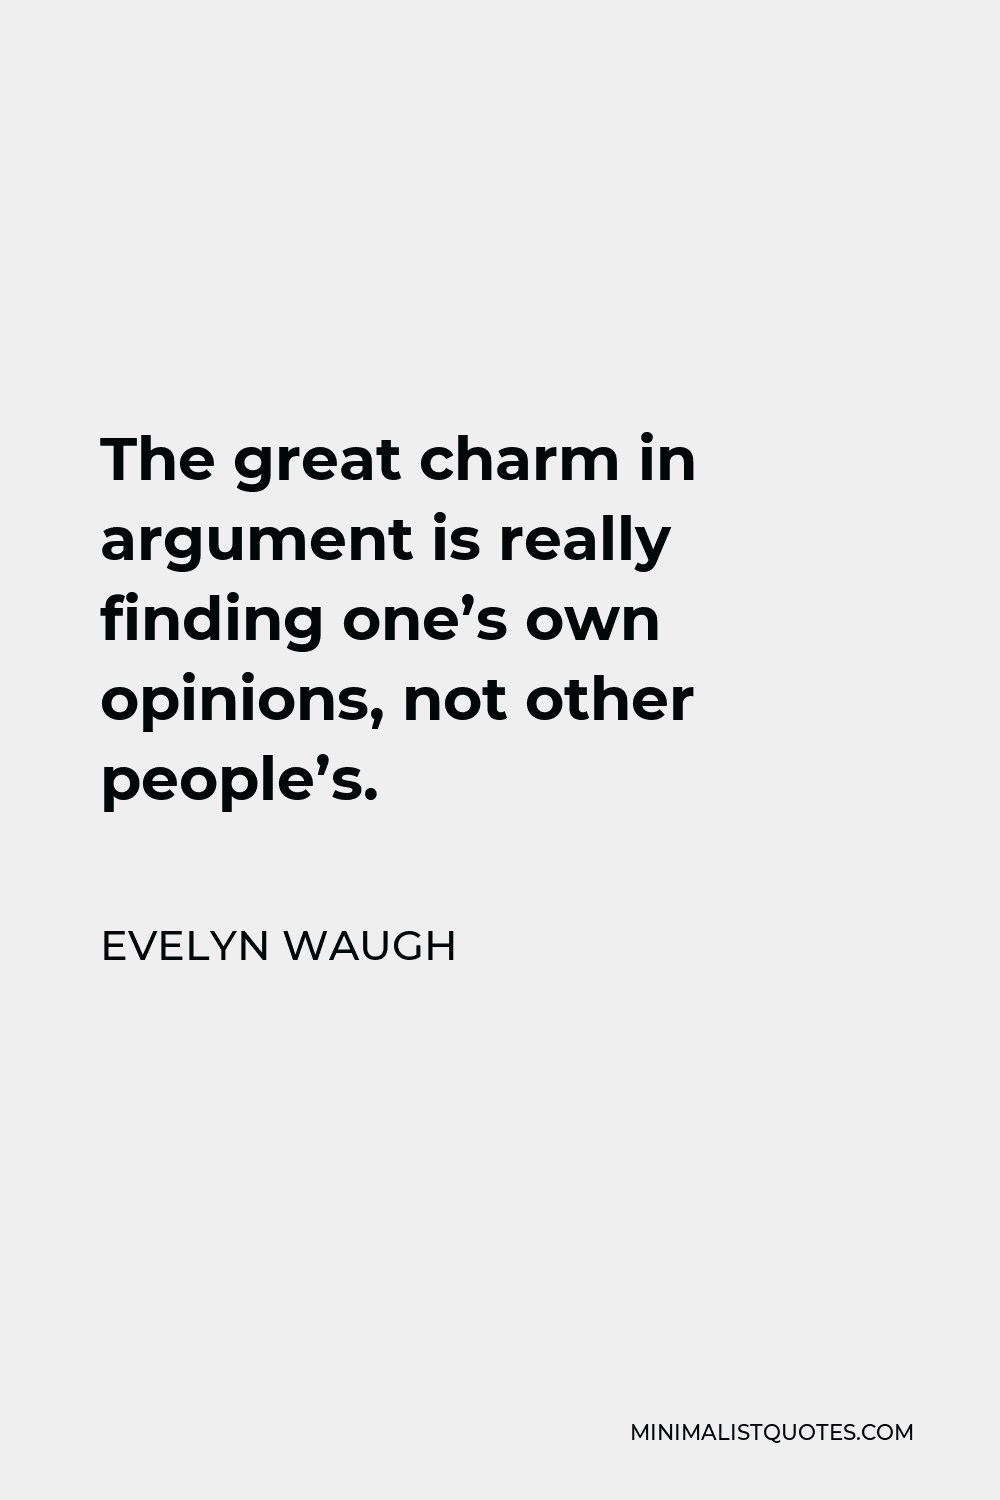 Evelyn Waugh Quote - The great charm in argument is really finding one’s own opinions, not other people’s.